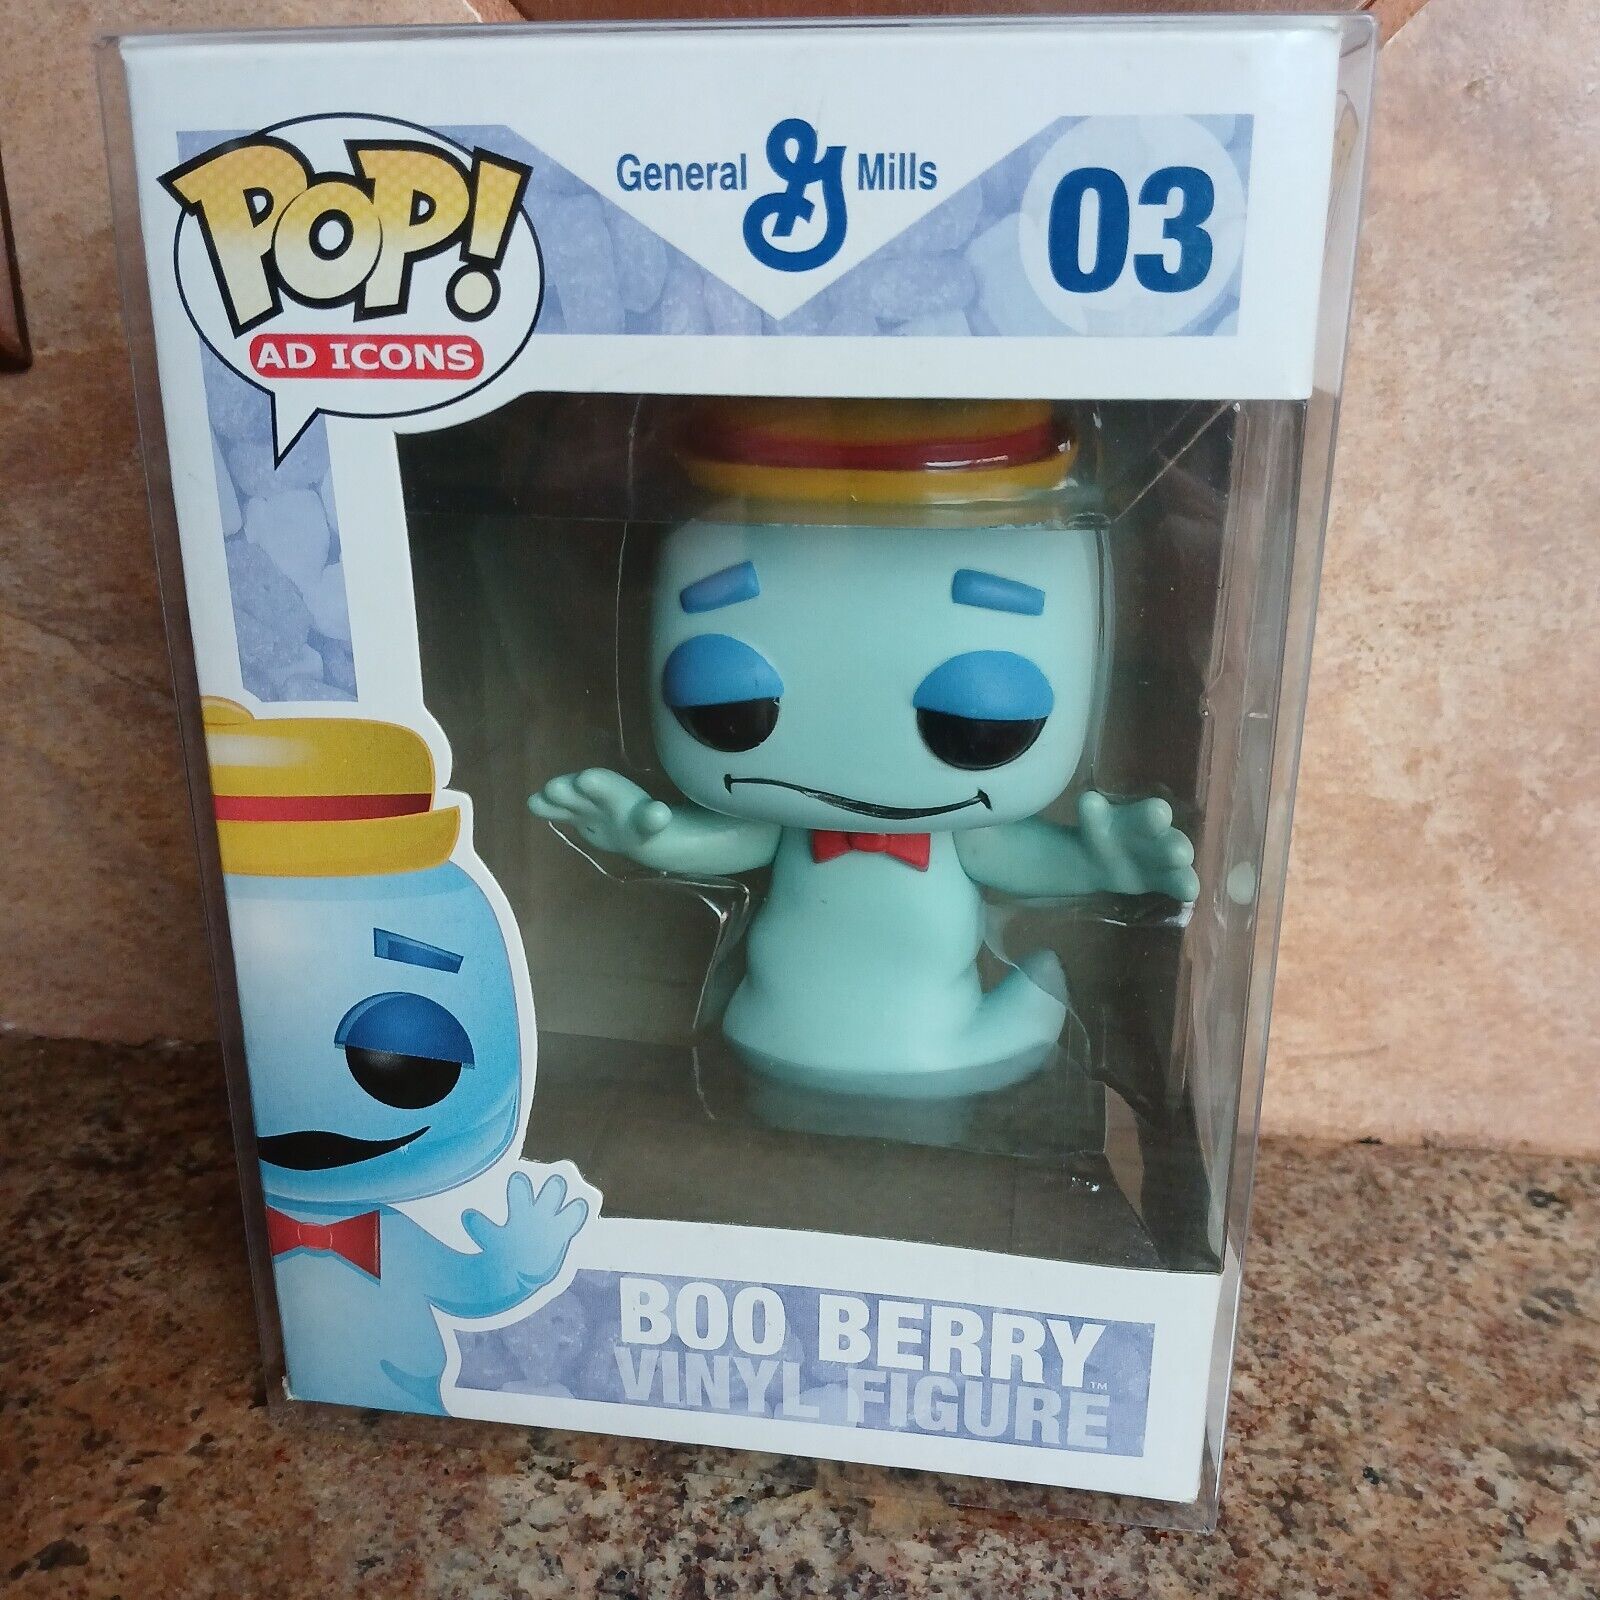 VAULTED Funko POP AD ICONS General Mills 03 BOO BERRY - with Protector